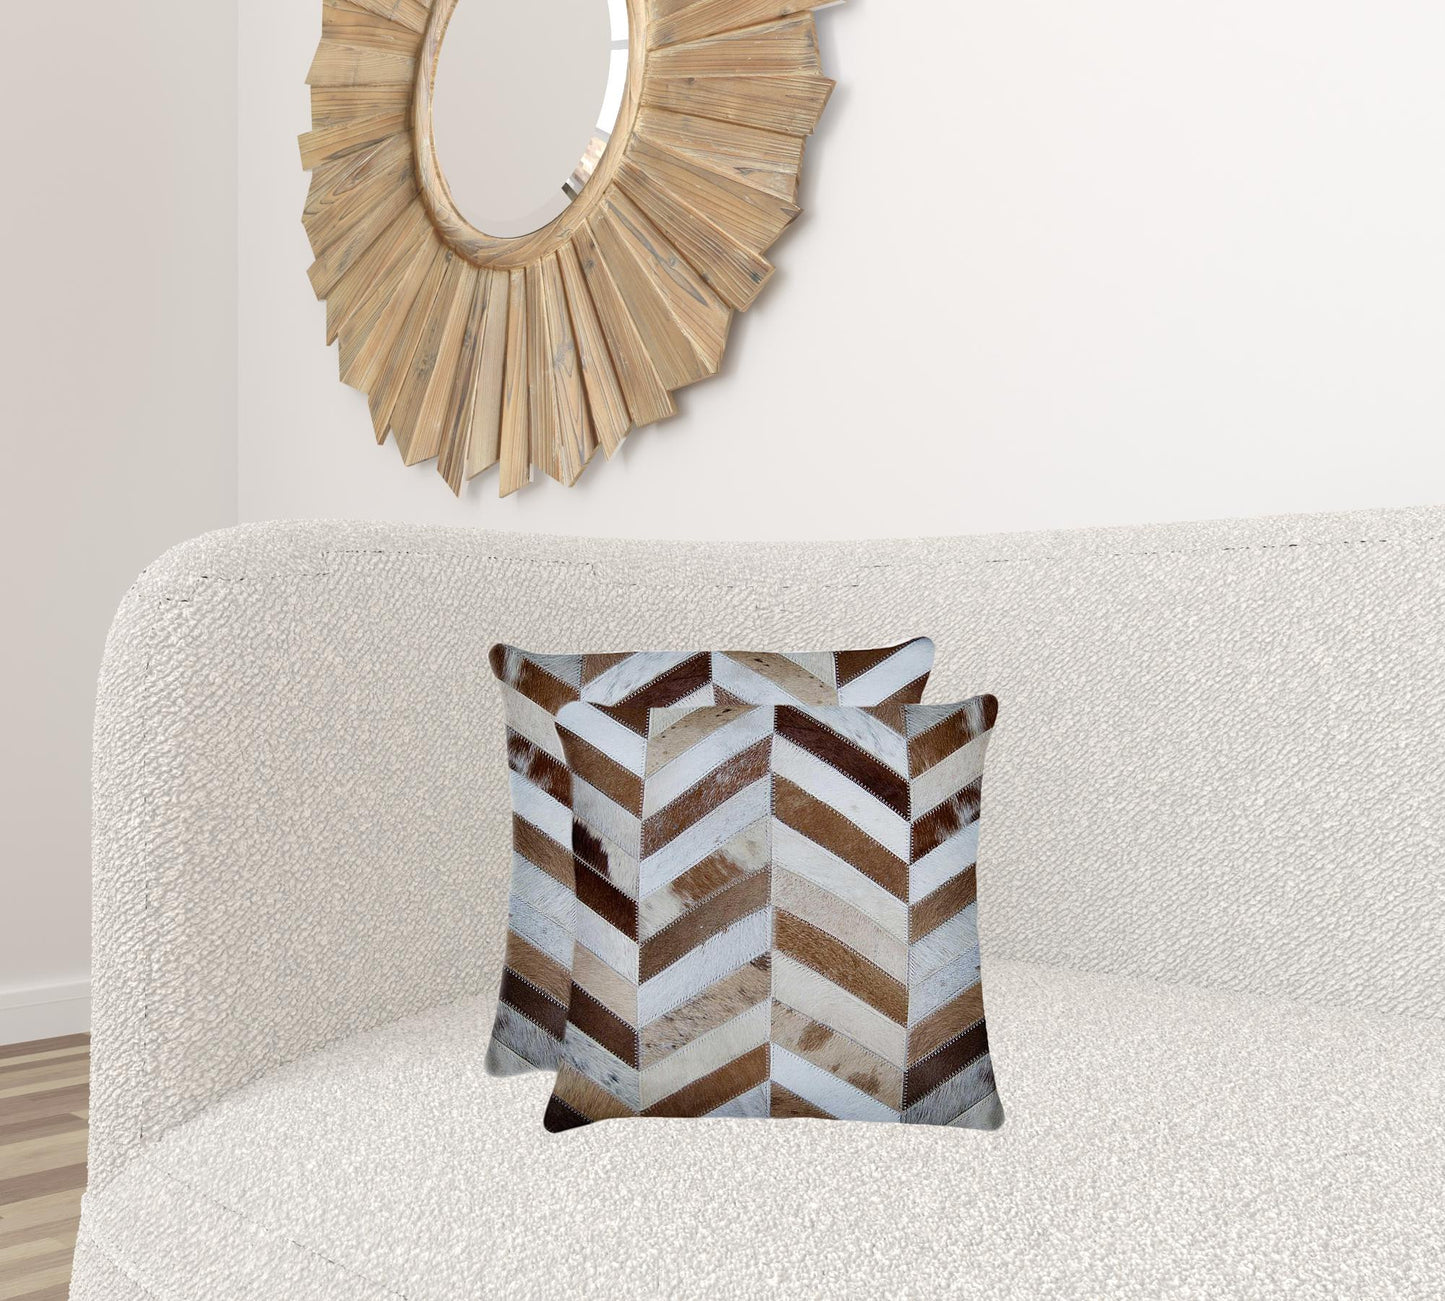 18" X 18" X 5" Modern And Natural Cowhide  Pillow 2 Pack